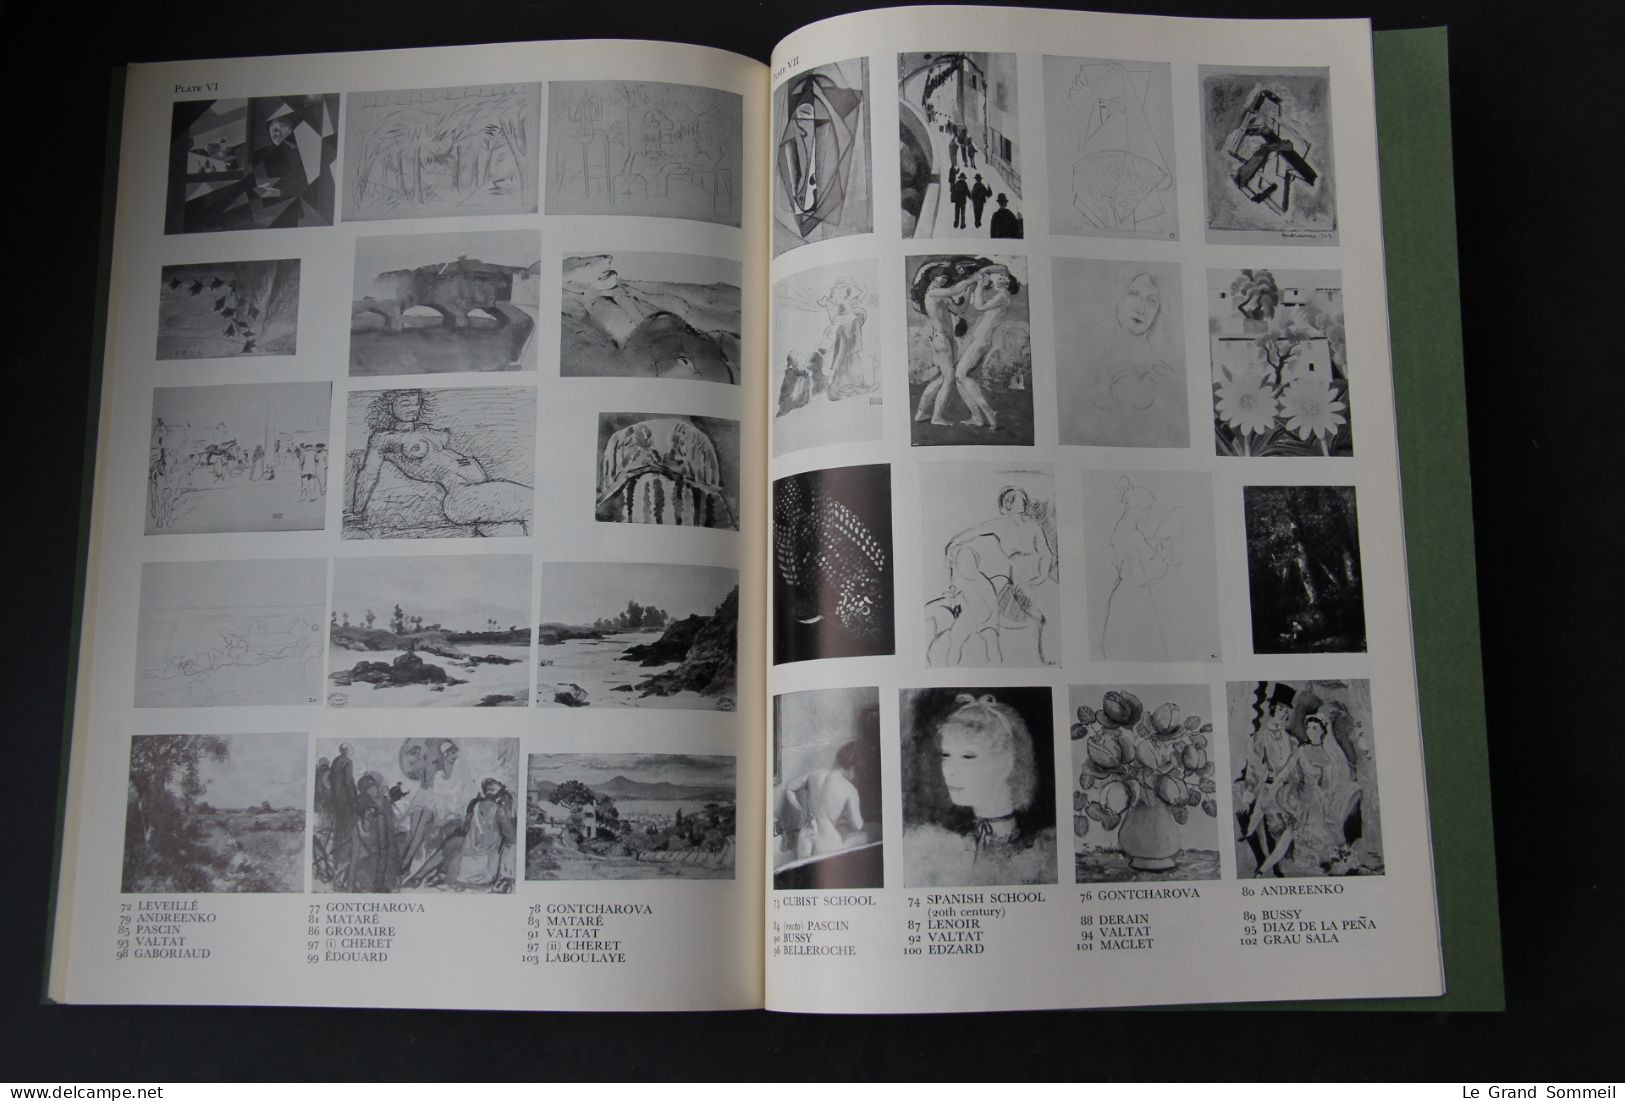 Sotheby&Co: 31/10/1973 catalogue of impressionist and modern paintings & drawings + Price list